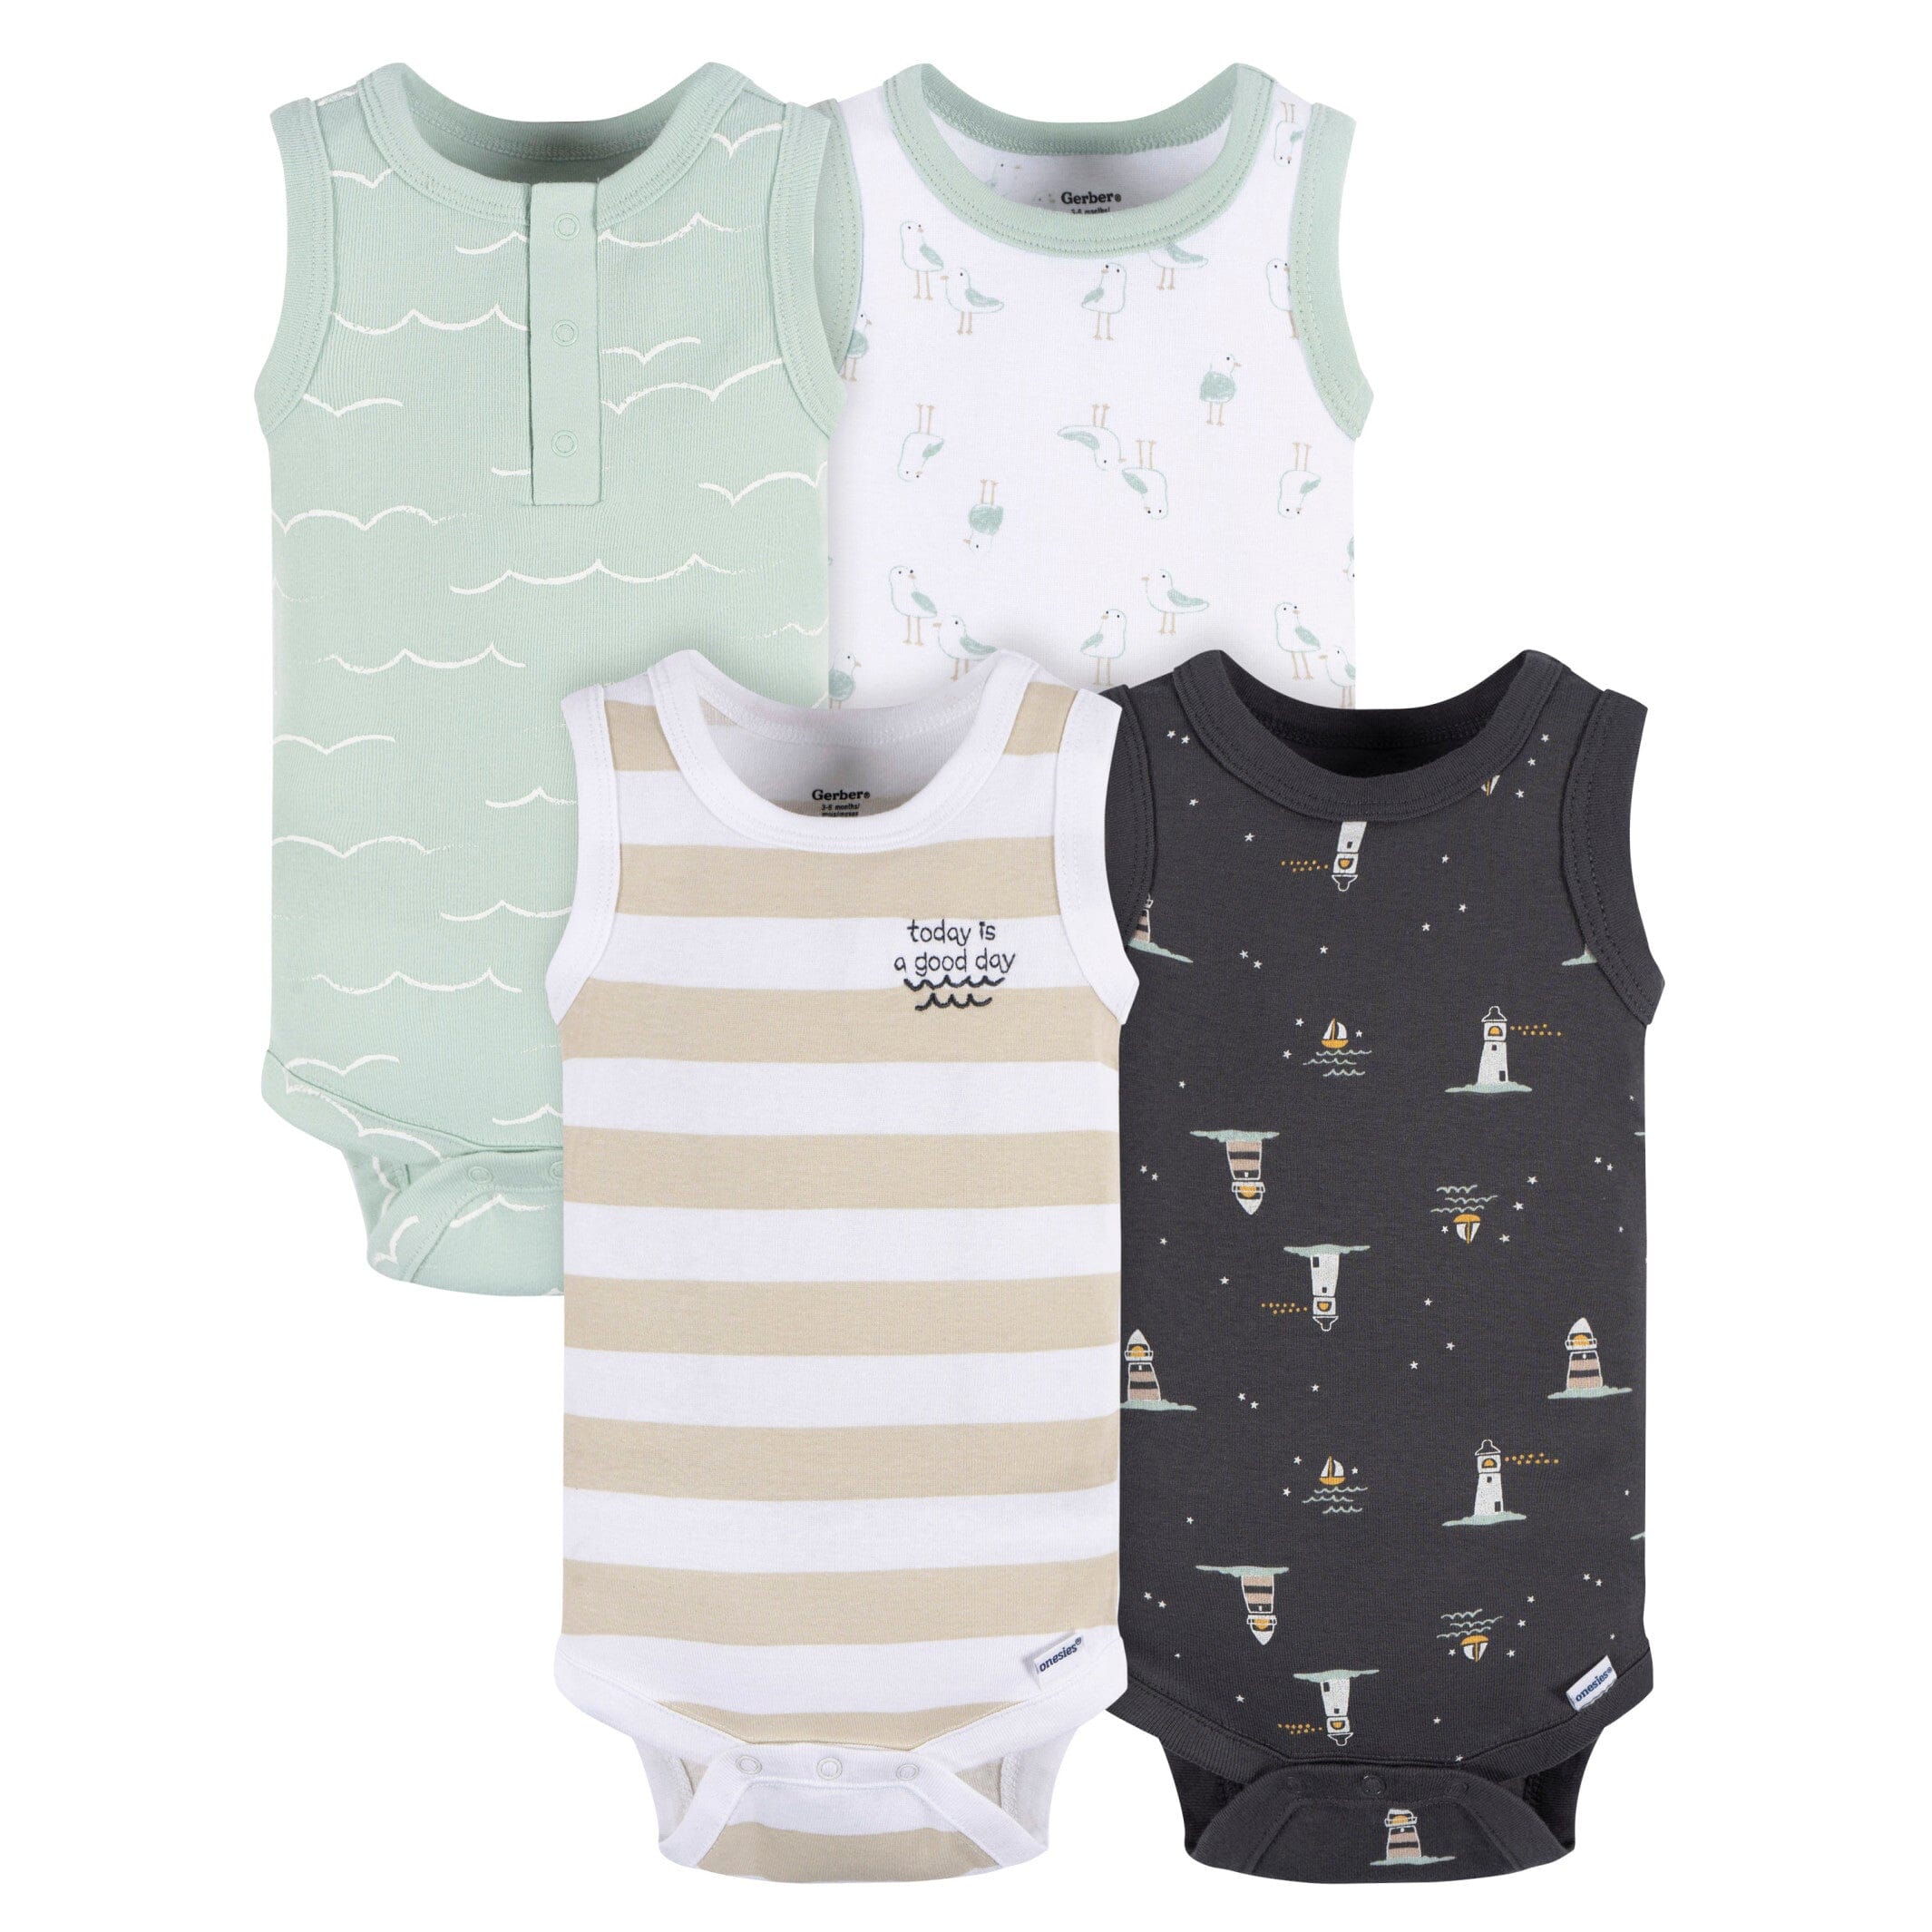 All Baby Clothing